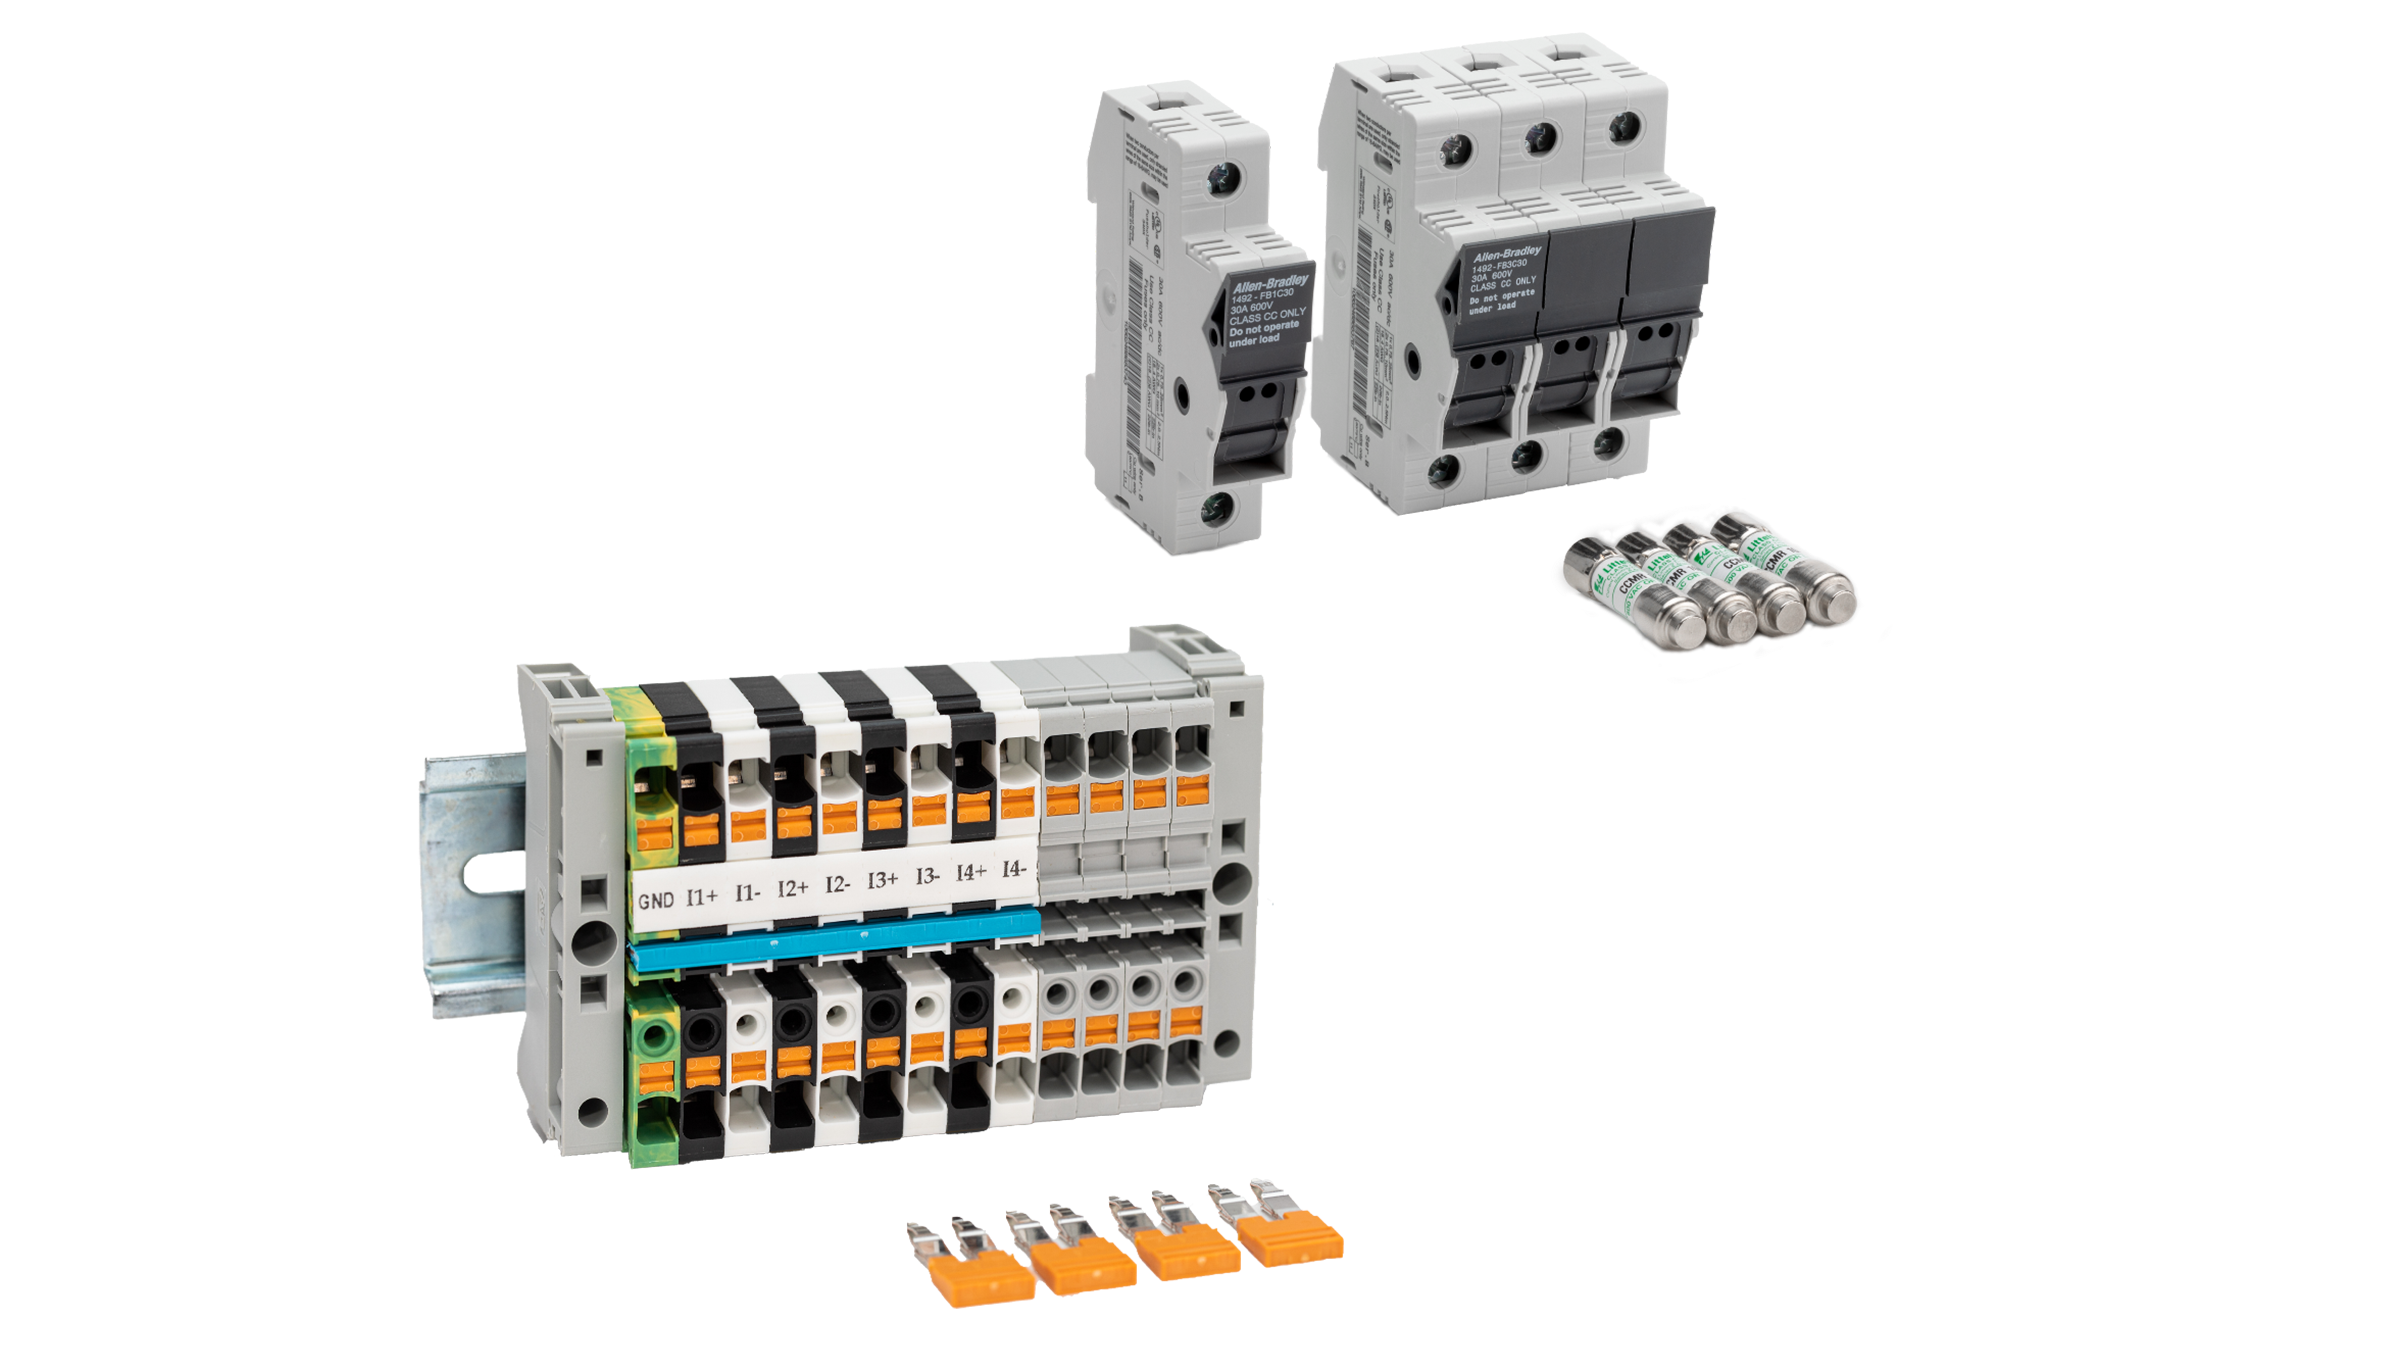 Group photo of PowerMonitor accessory kit with a single shorting block and four orange jumpers removed from block base in the foreground and one single 1 A fuse and three 10 A blocks with their matching fuses in the background